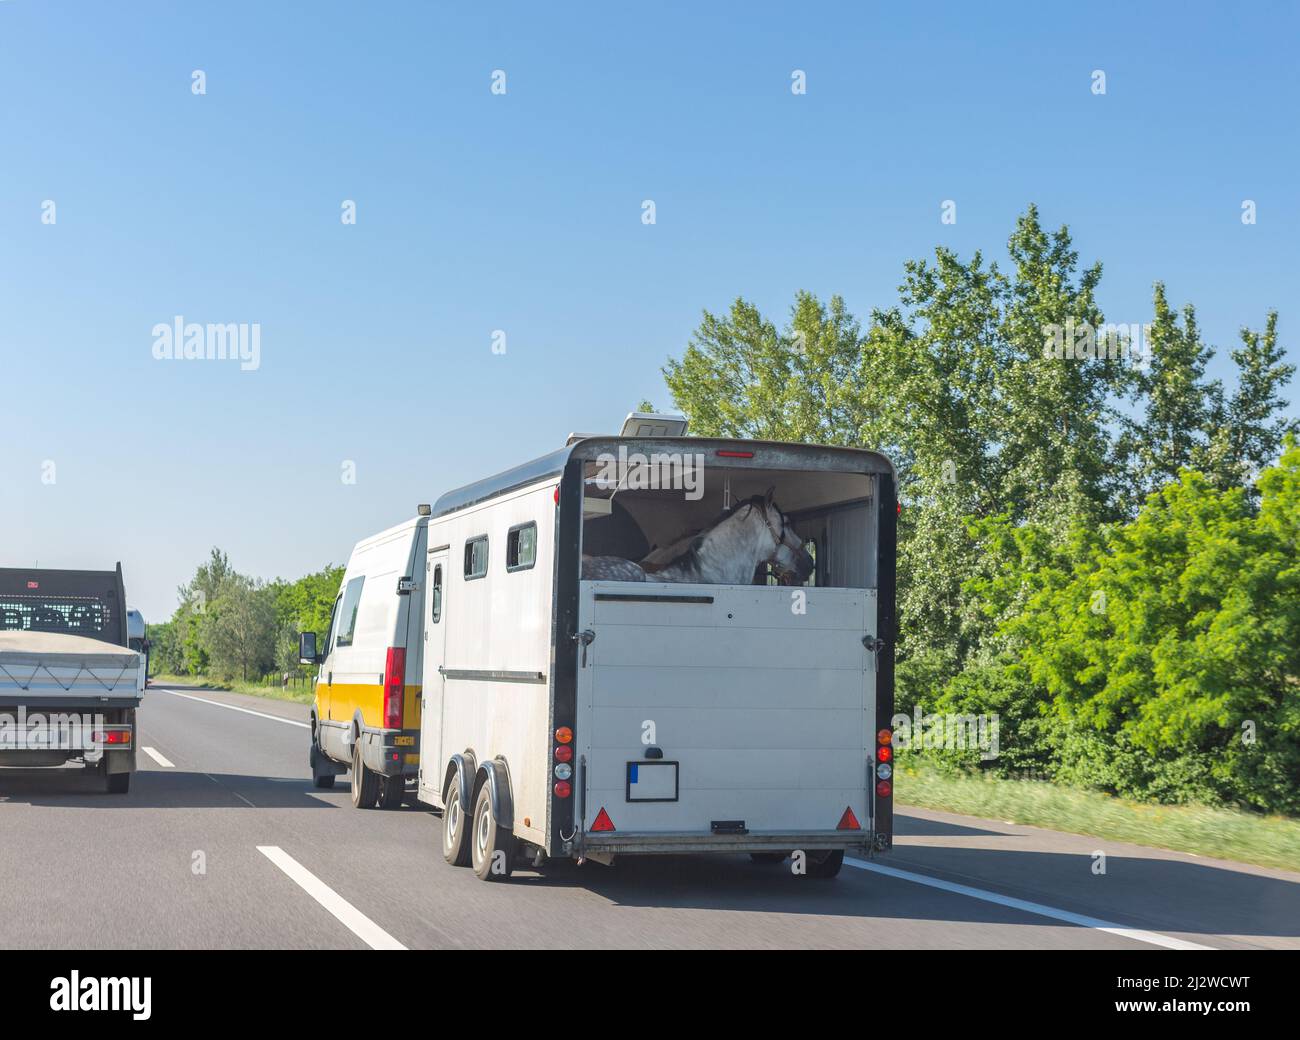 European-style horse box with horses pulled by minibus on hungarian road. Horse trailer on highway. Stock Photo